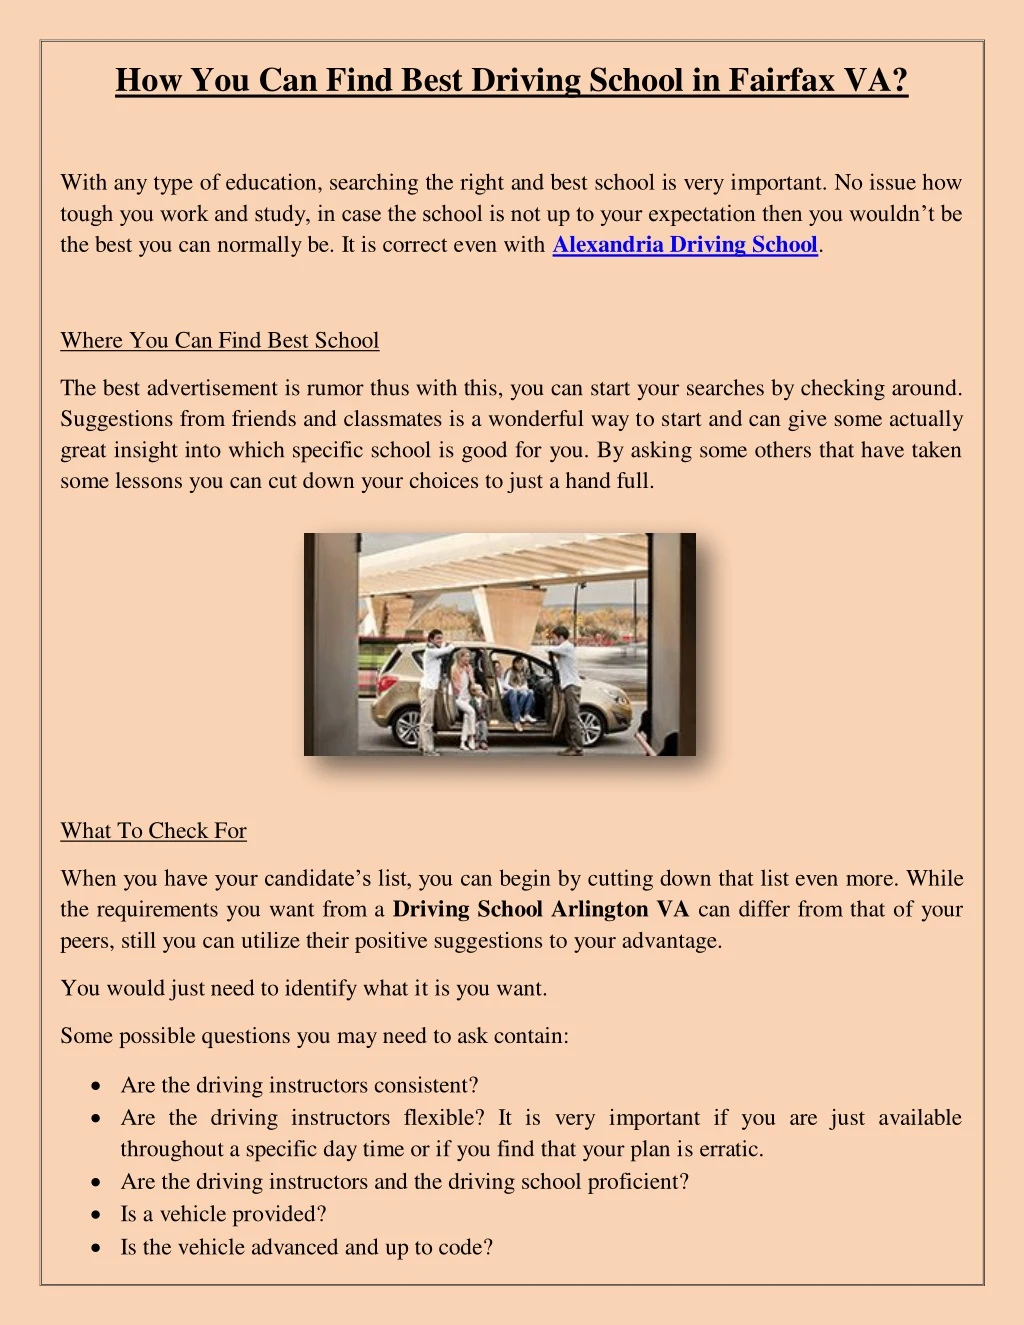 how you can find best driving school in fairfax va